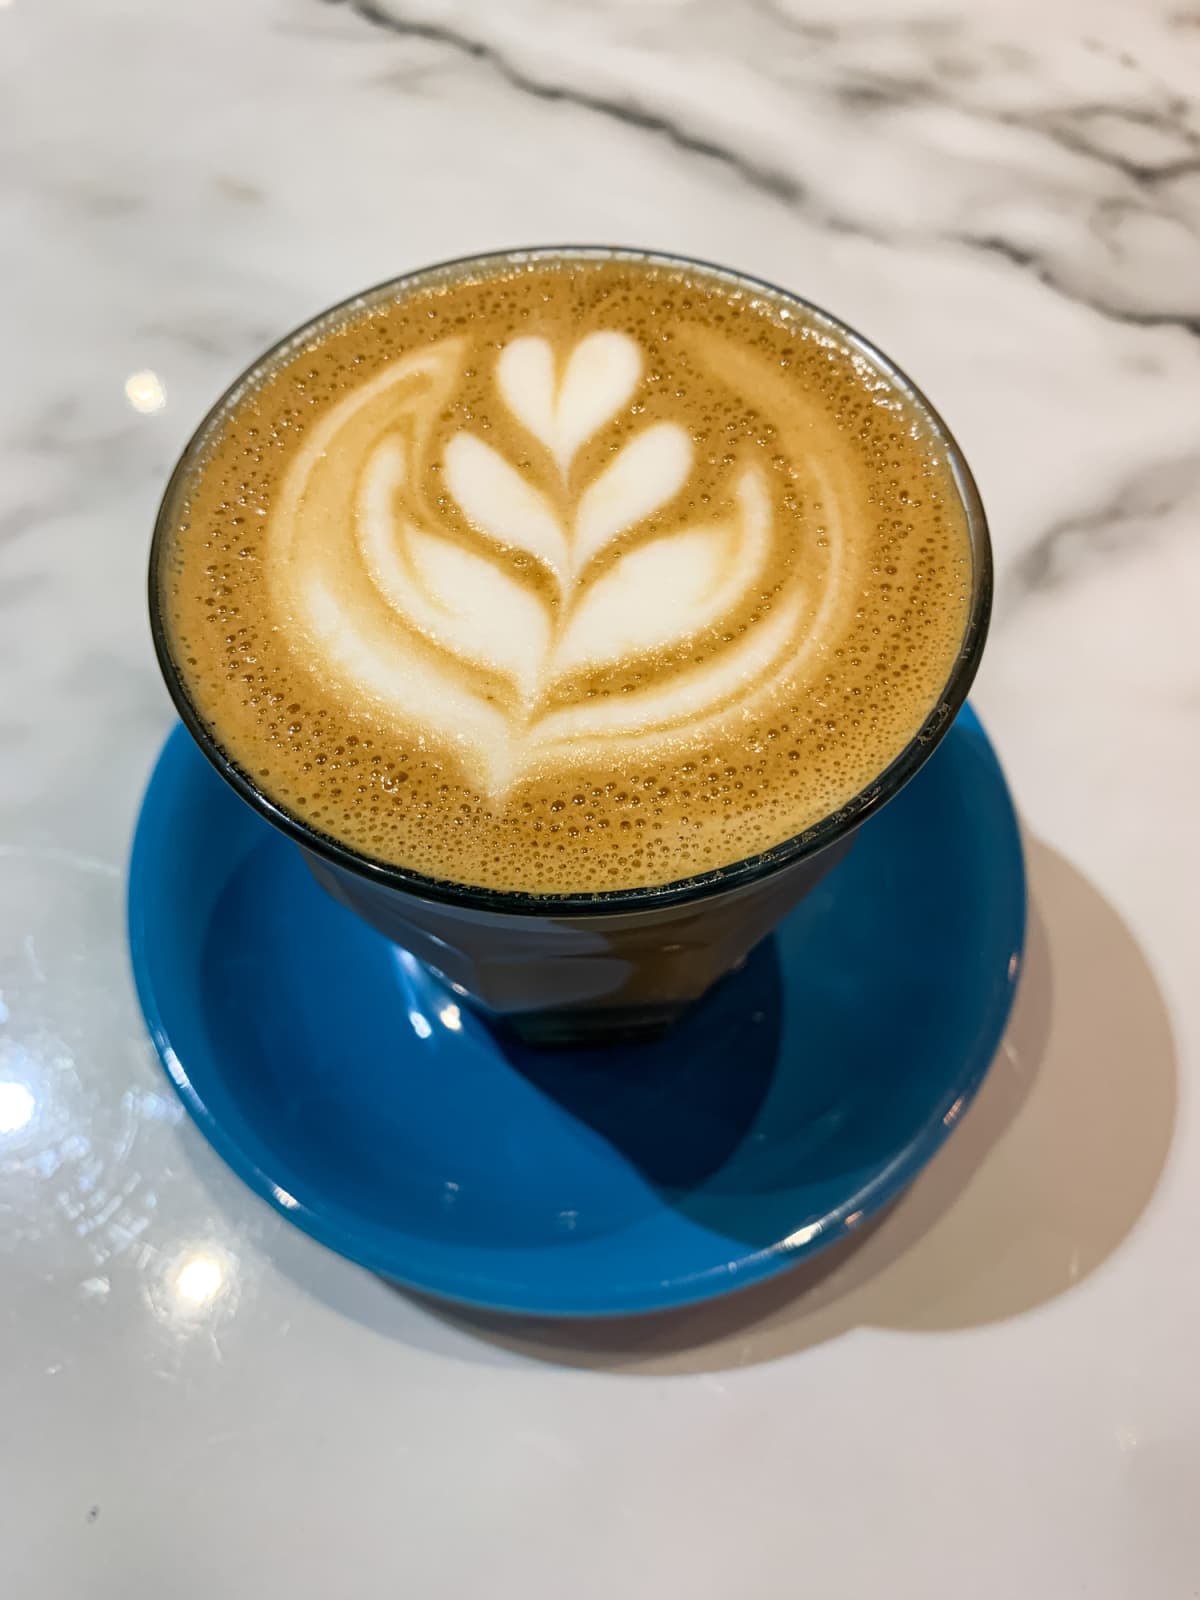 Mug of flat white coffee on a white marble background with heart flower shape latte art